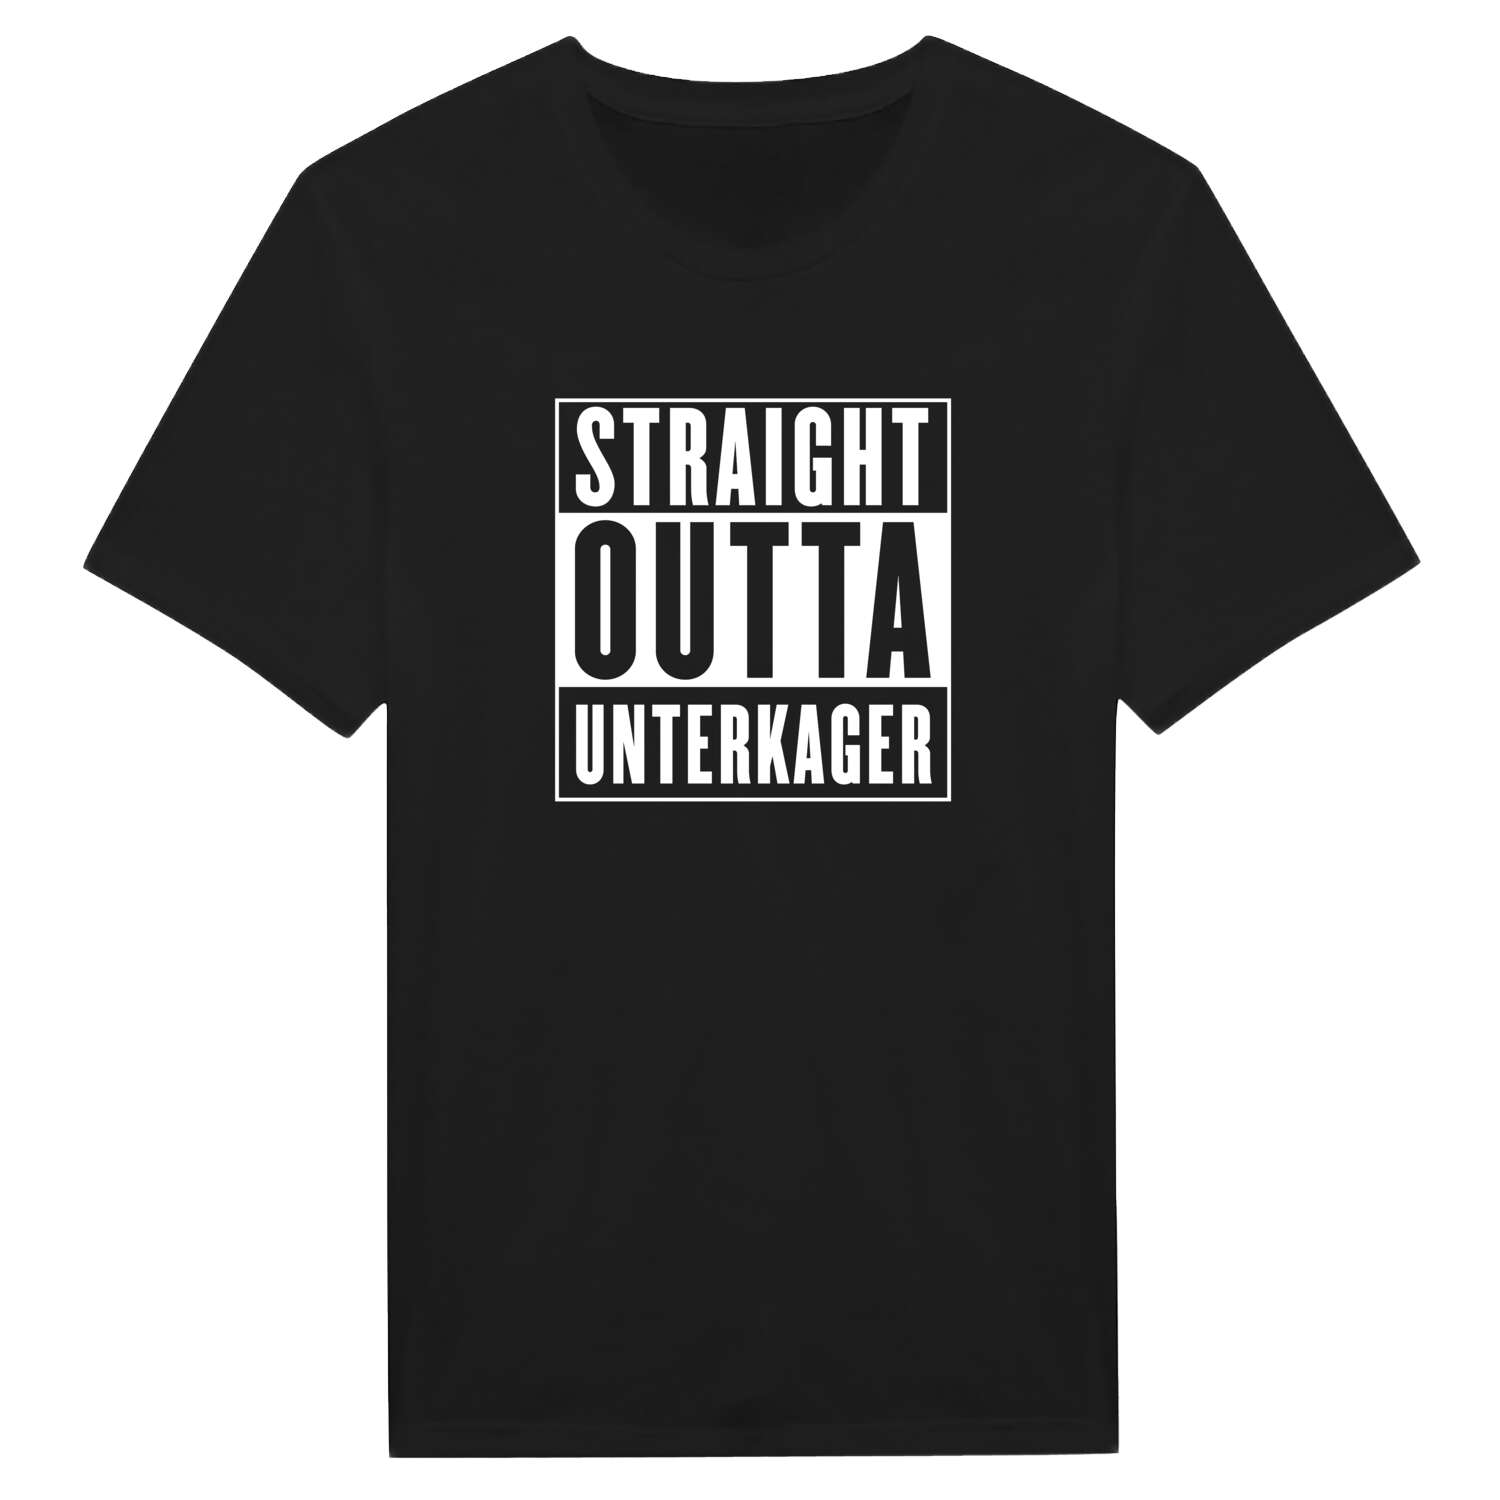 Unterkager T-Shirt »Straight Outta«